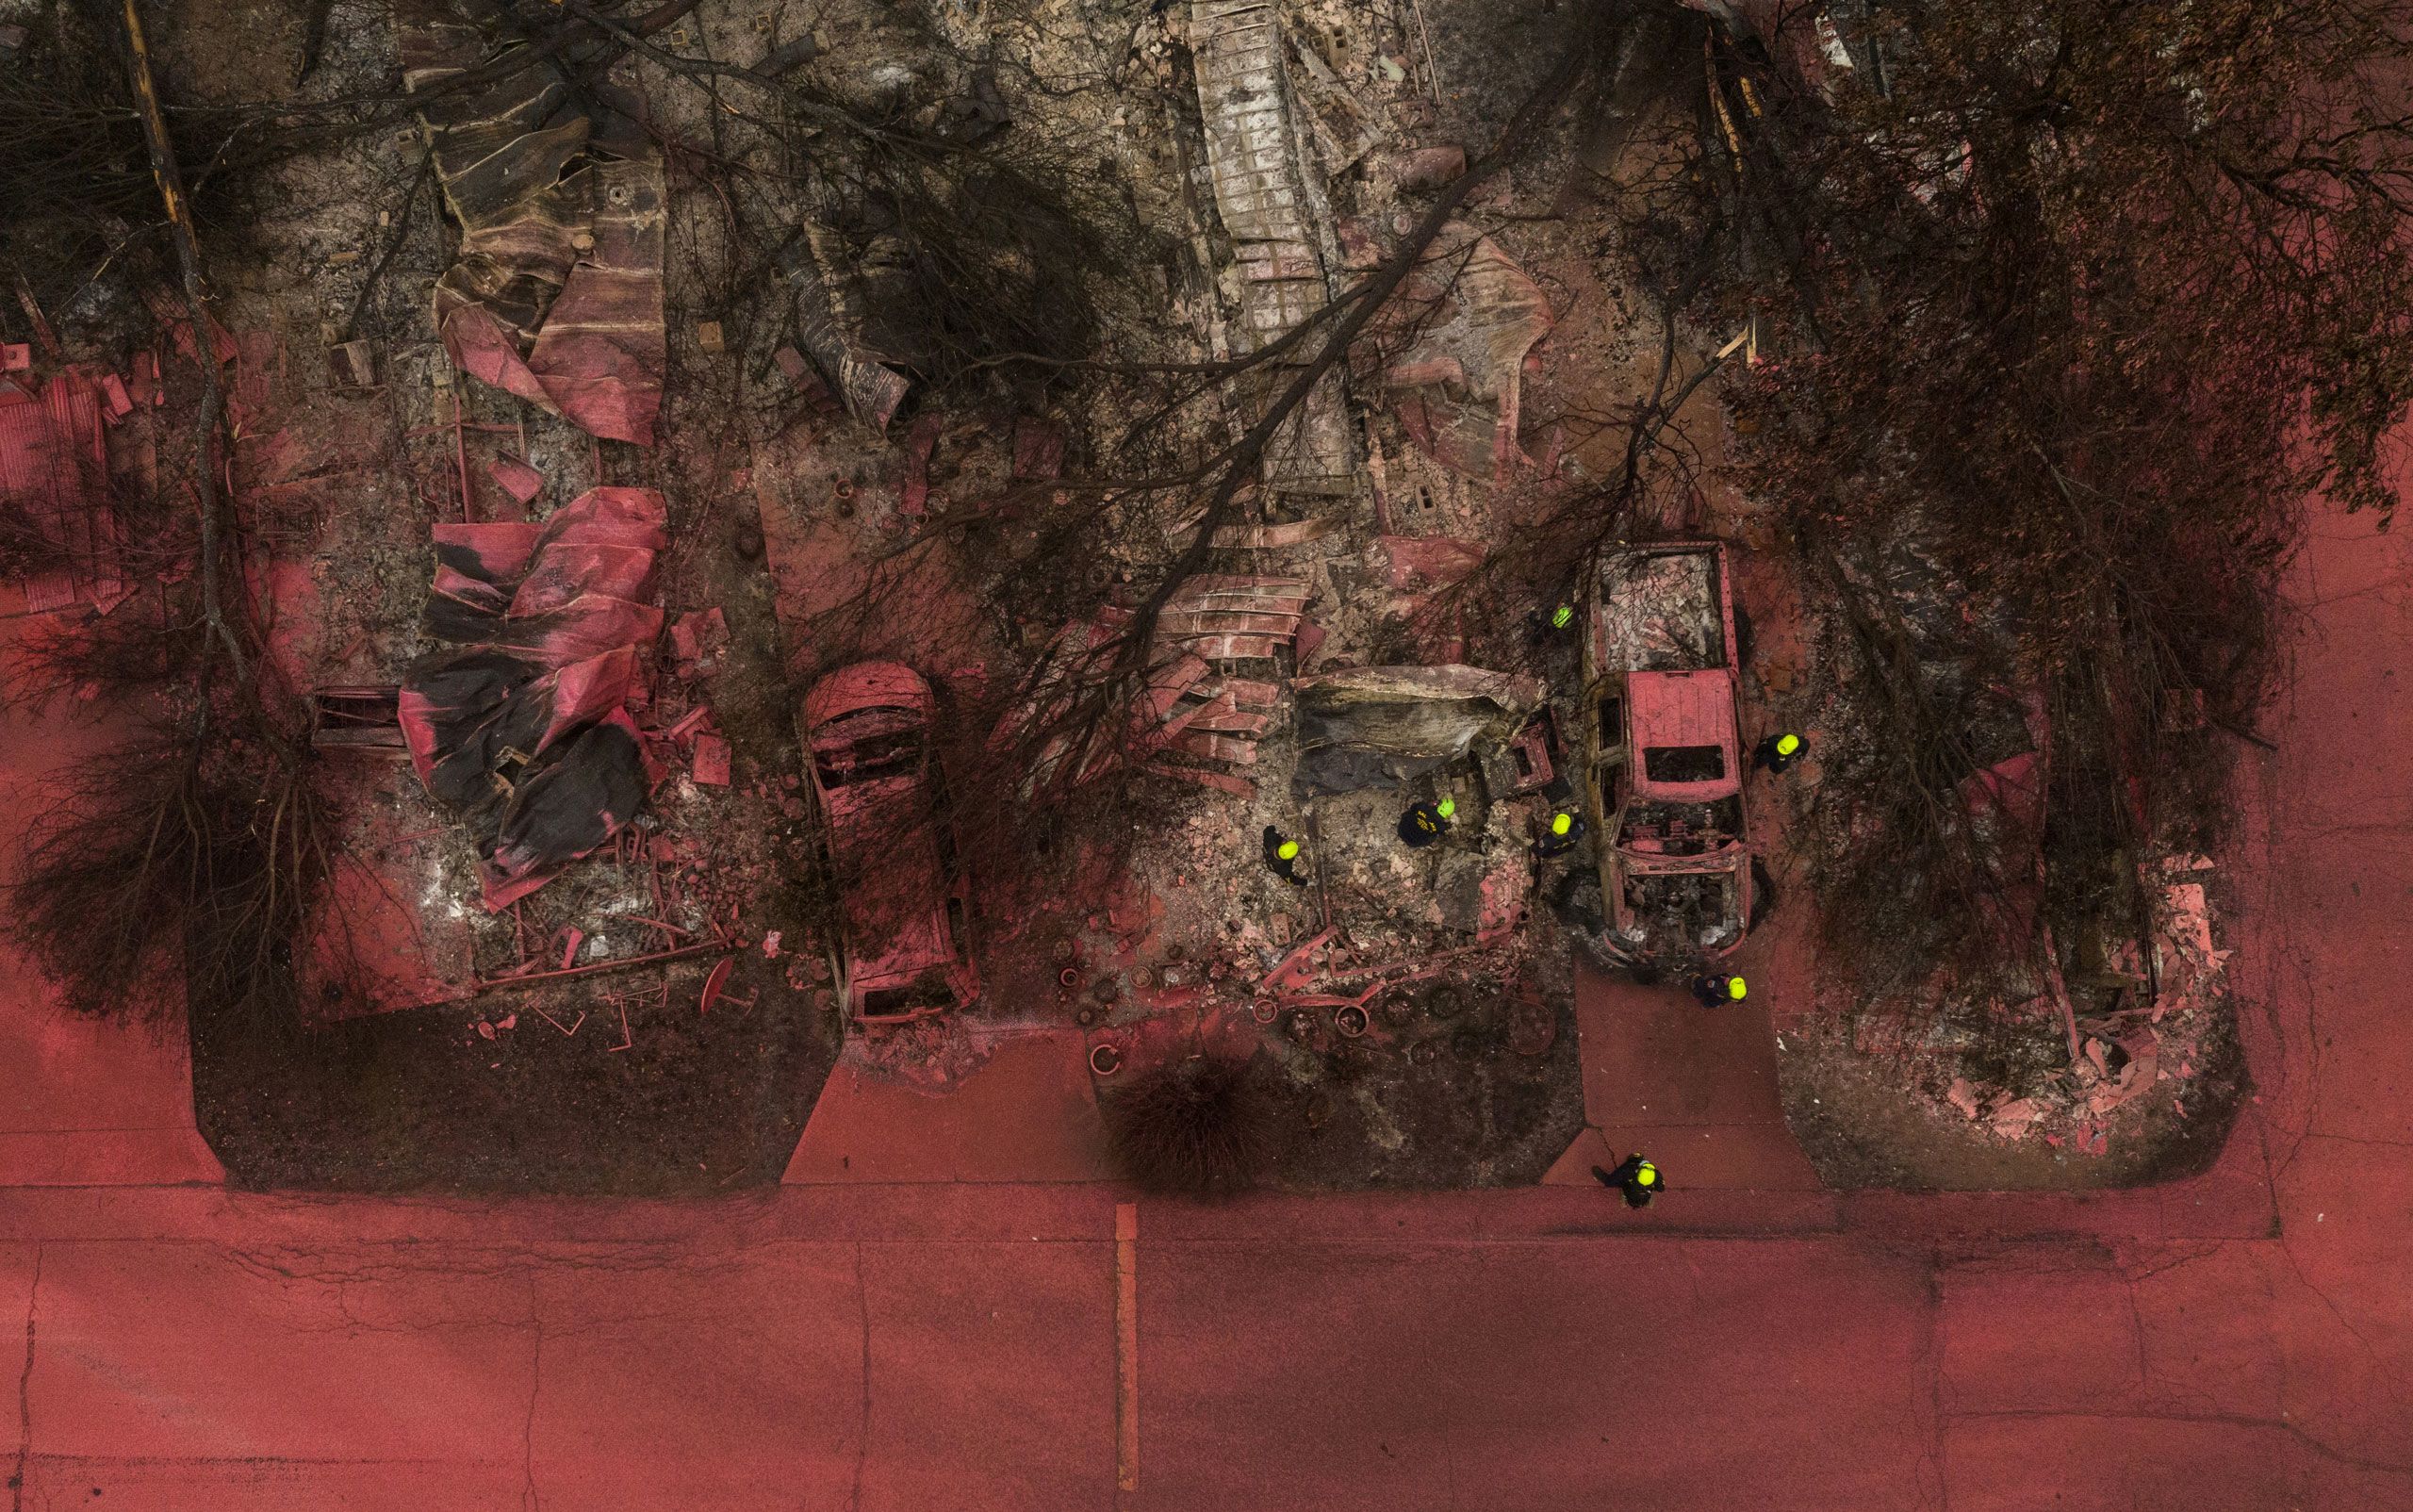 A search and rescue team, surrounded by red fire retardant, look for victims under burned residences and vehicles.